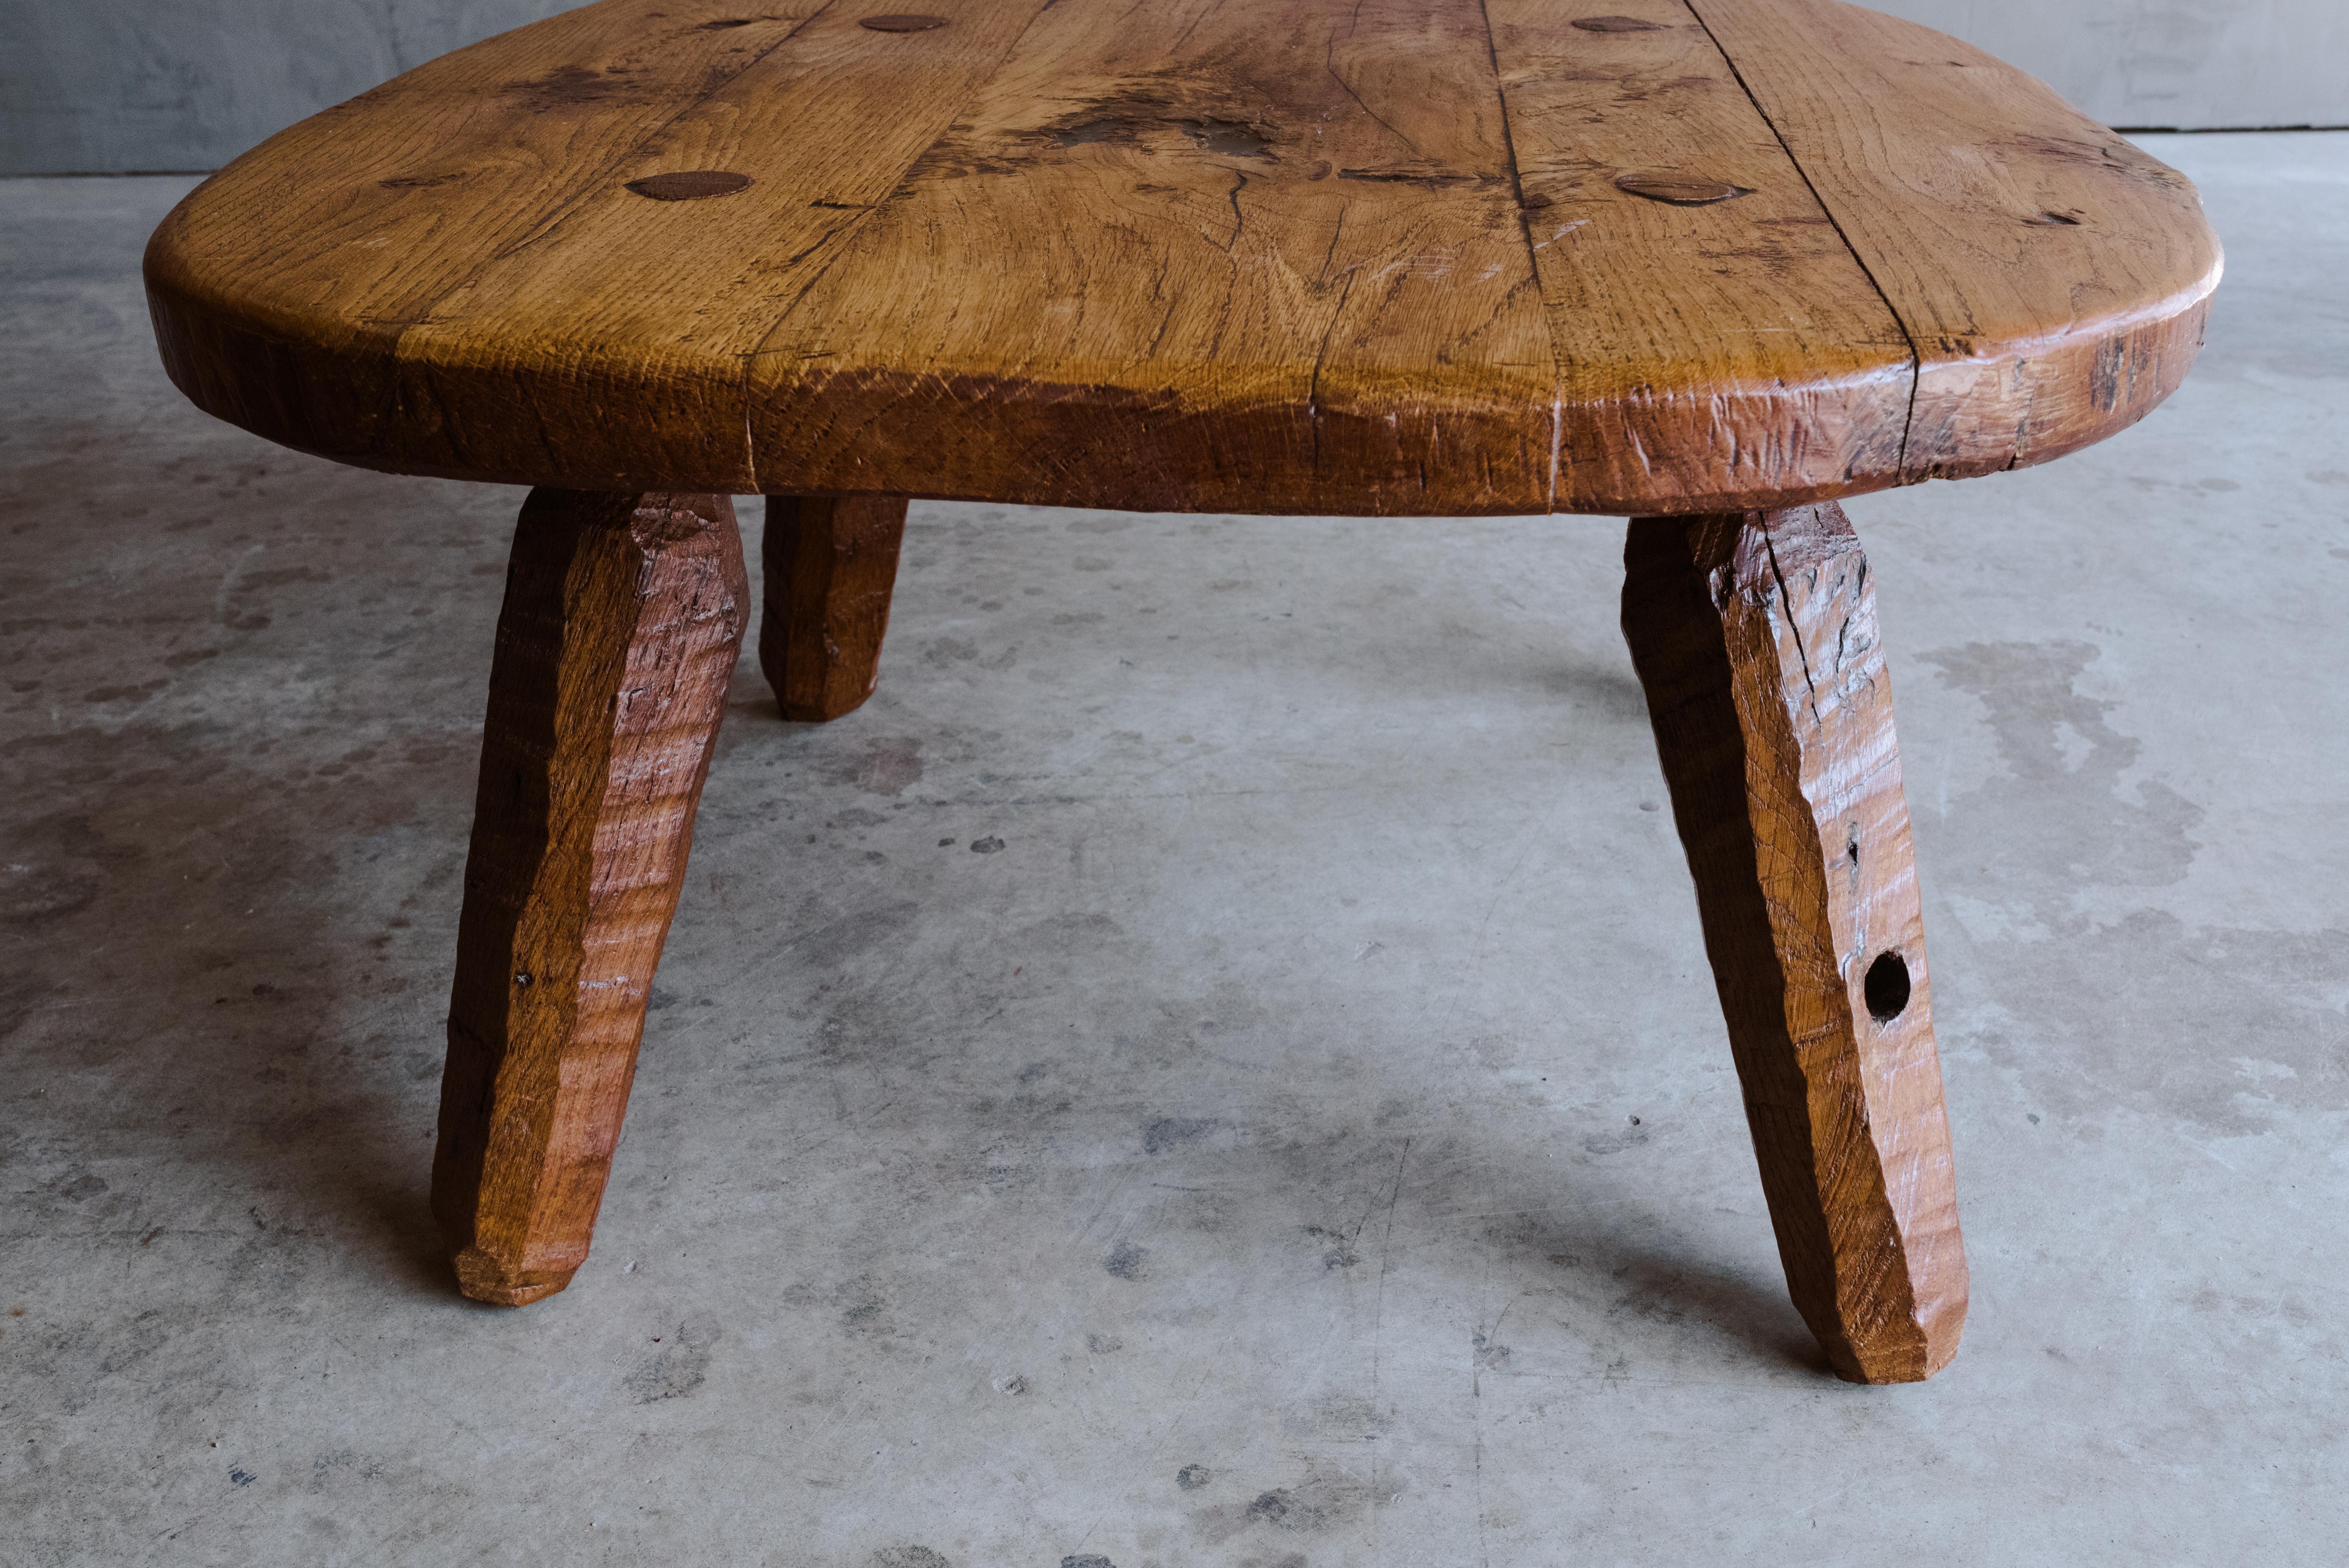 Vintage oak coffee table from France, Circa 1960. Primitive model with nice patina and wear.